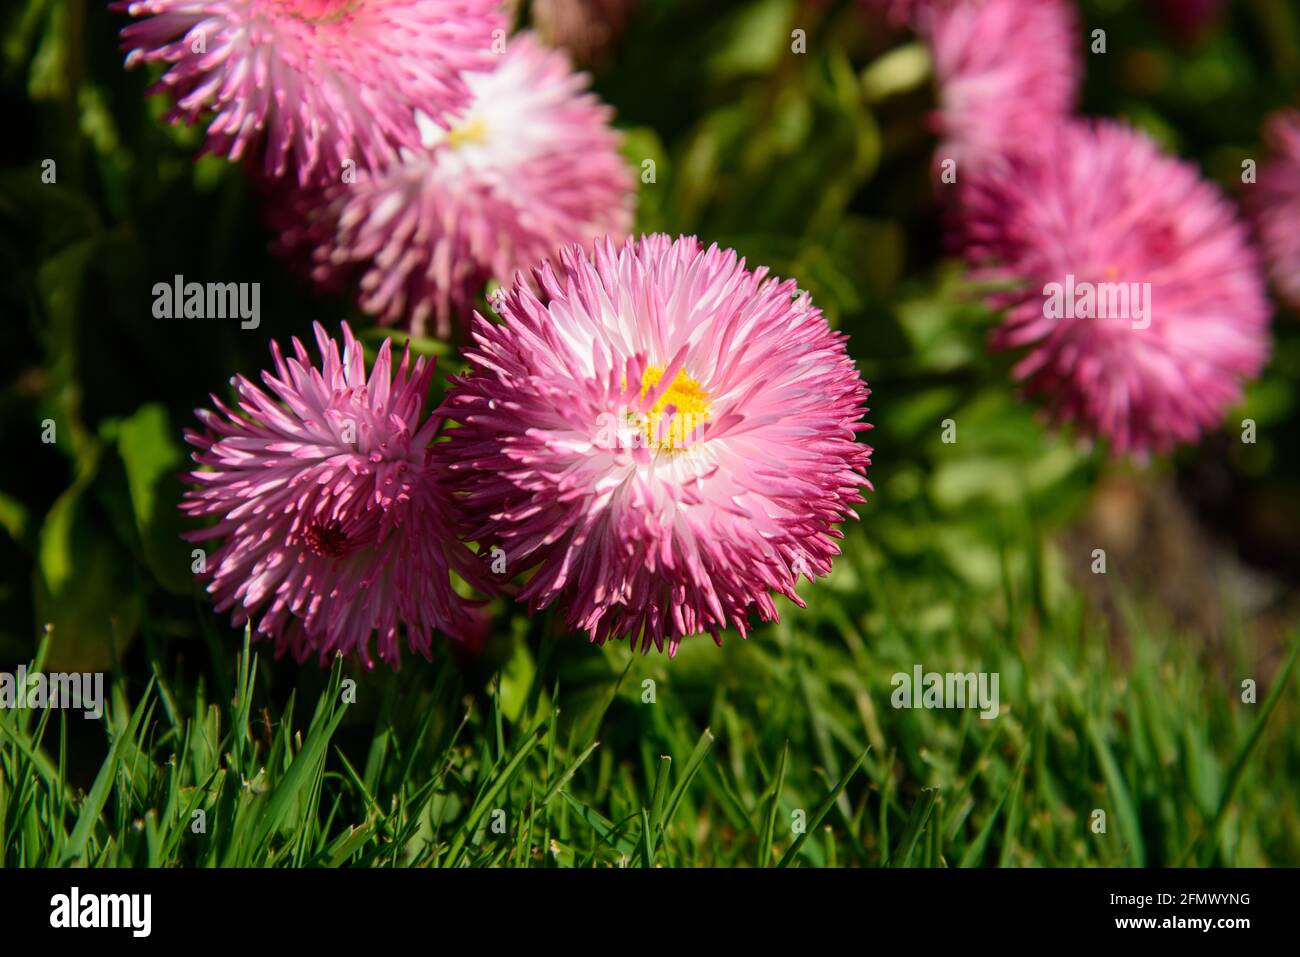 Pink Daisy flowers blossom in the garden Stock Photo